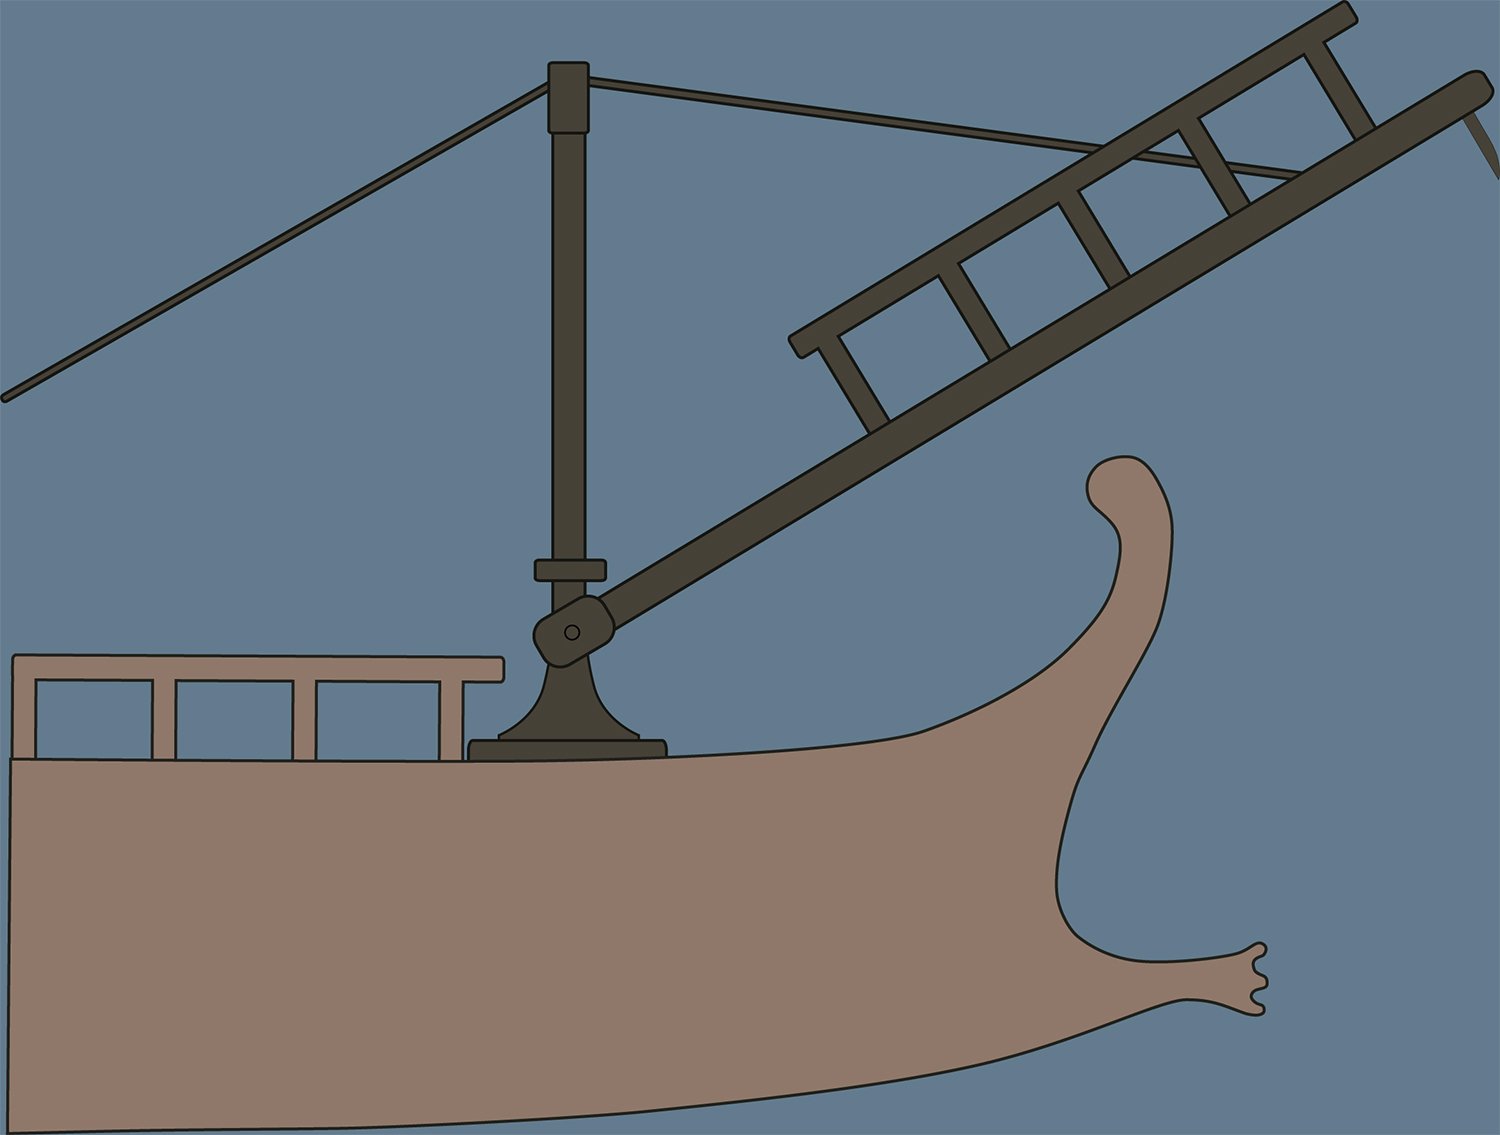 A stylized illustration of a Corvus, the ship-mounted boarding device used by the Romans during naval battles, showing its prominent beak-like prow and the hinged bridge for boarding enemy vessels.